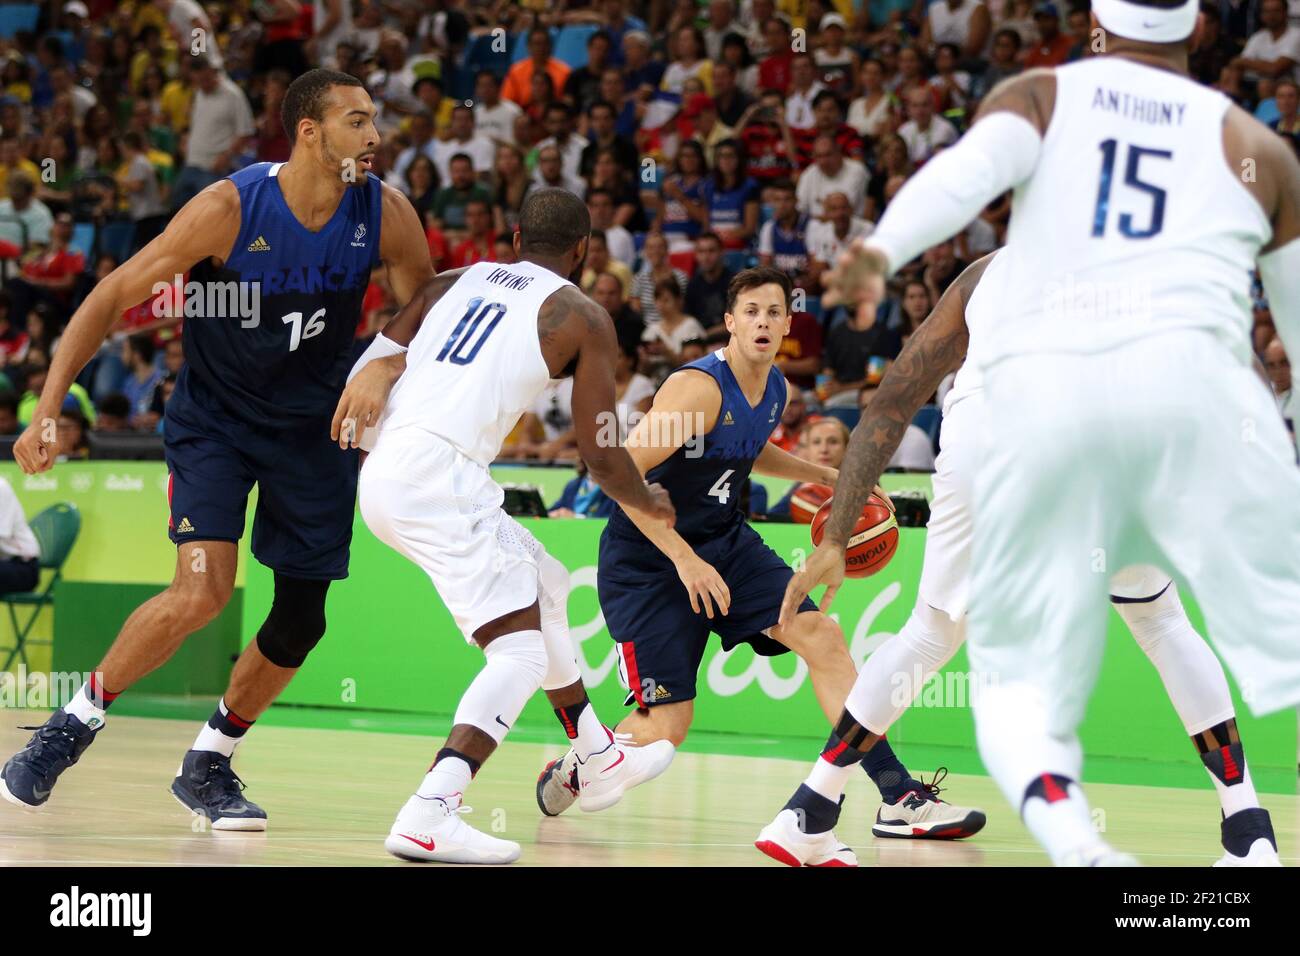 France s Thomas Heurtel and udy Gobert Basketball Men s in action against Kyire Irving (USA) during the Olympic Games RIO 2016, Basketball Men, USA v France, on August 14, 2016, in Rio, Brazil - Photo Eddy Lemaistre / KMSP / DPPI Stock Photo